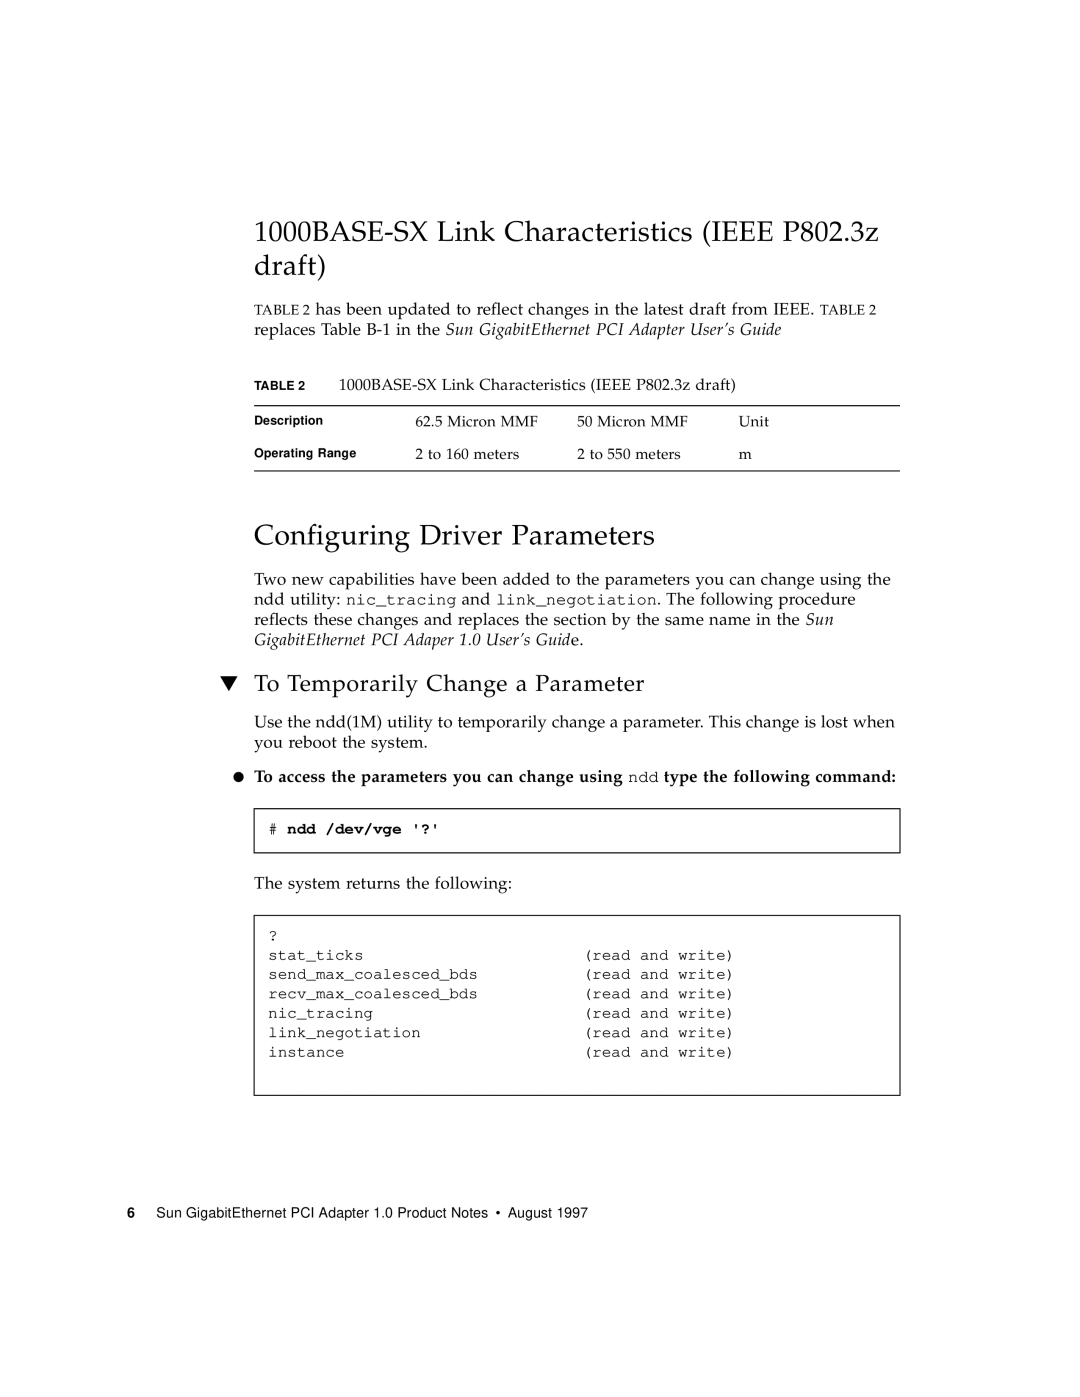 Sun Microsystems manual 1000BASE-SX Link Characteristics IEEE P802.3z draft, Configuring Driver Parameters 